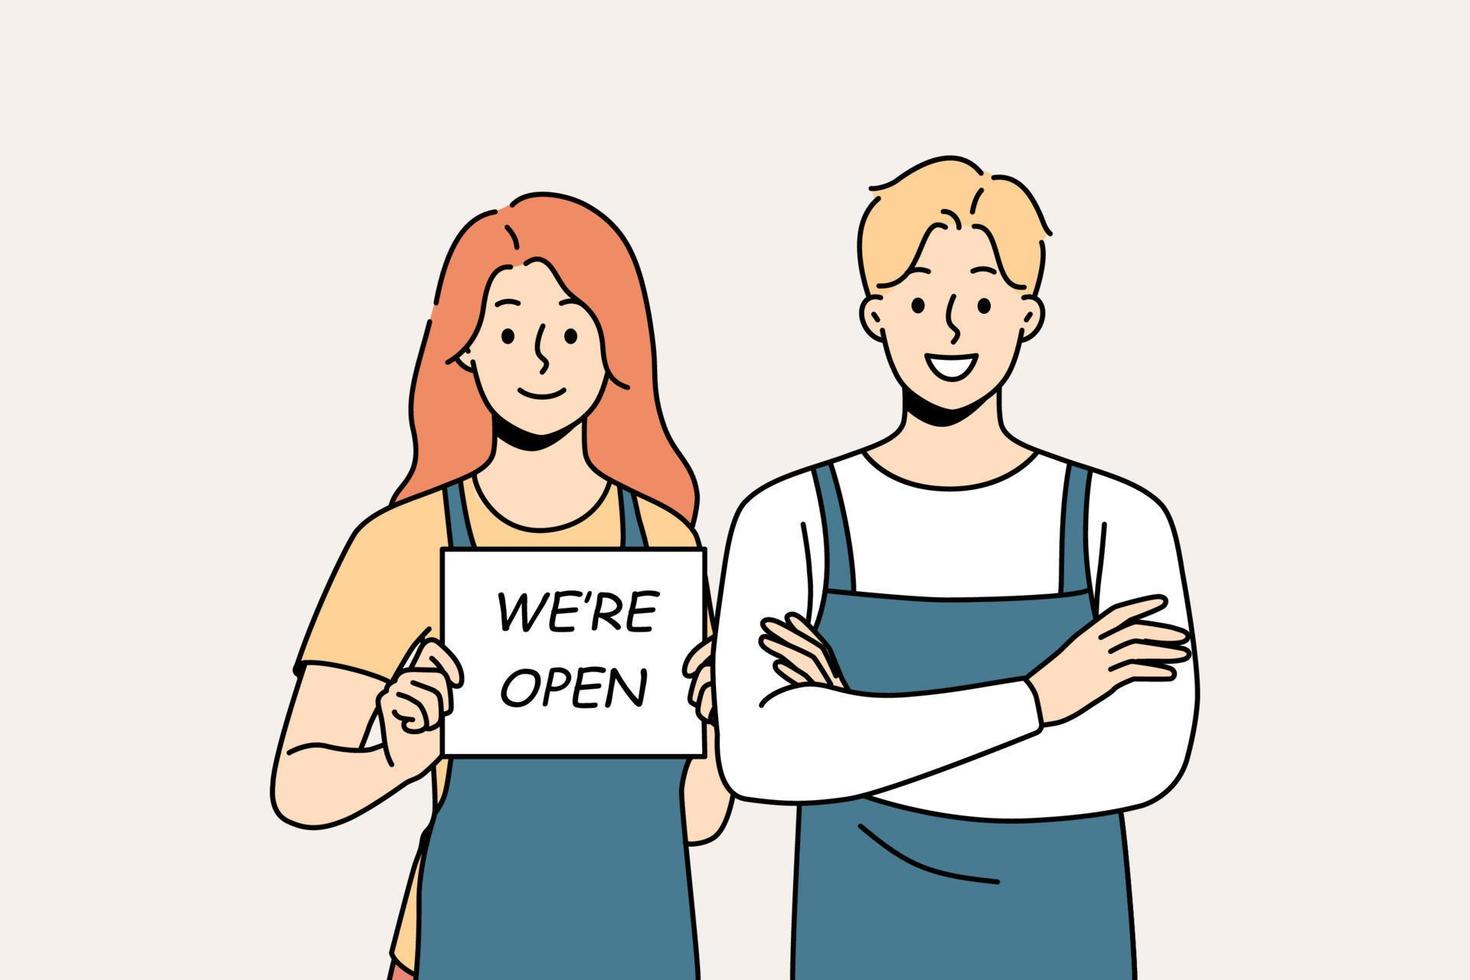 Smiling waiters in aprons hold open sign. Happy man and woman cafe staff notify about shop opening. Vector illustration.